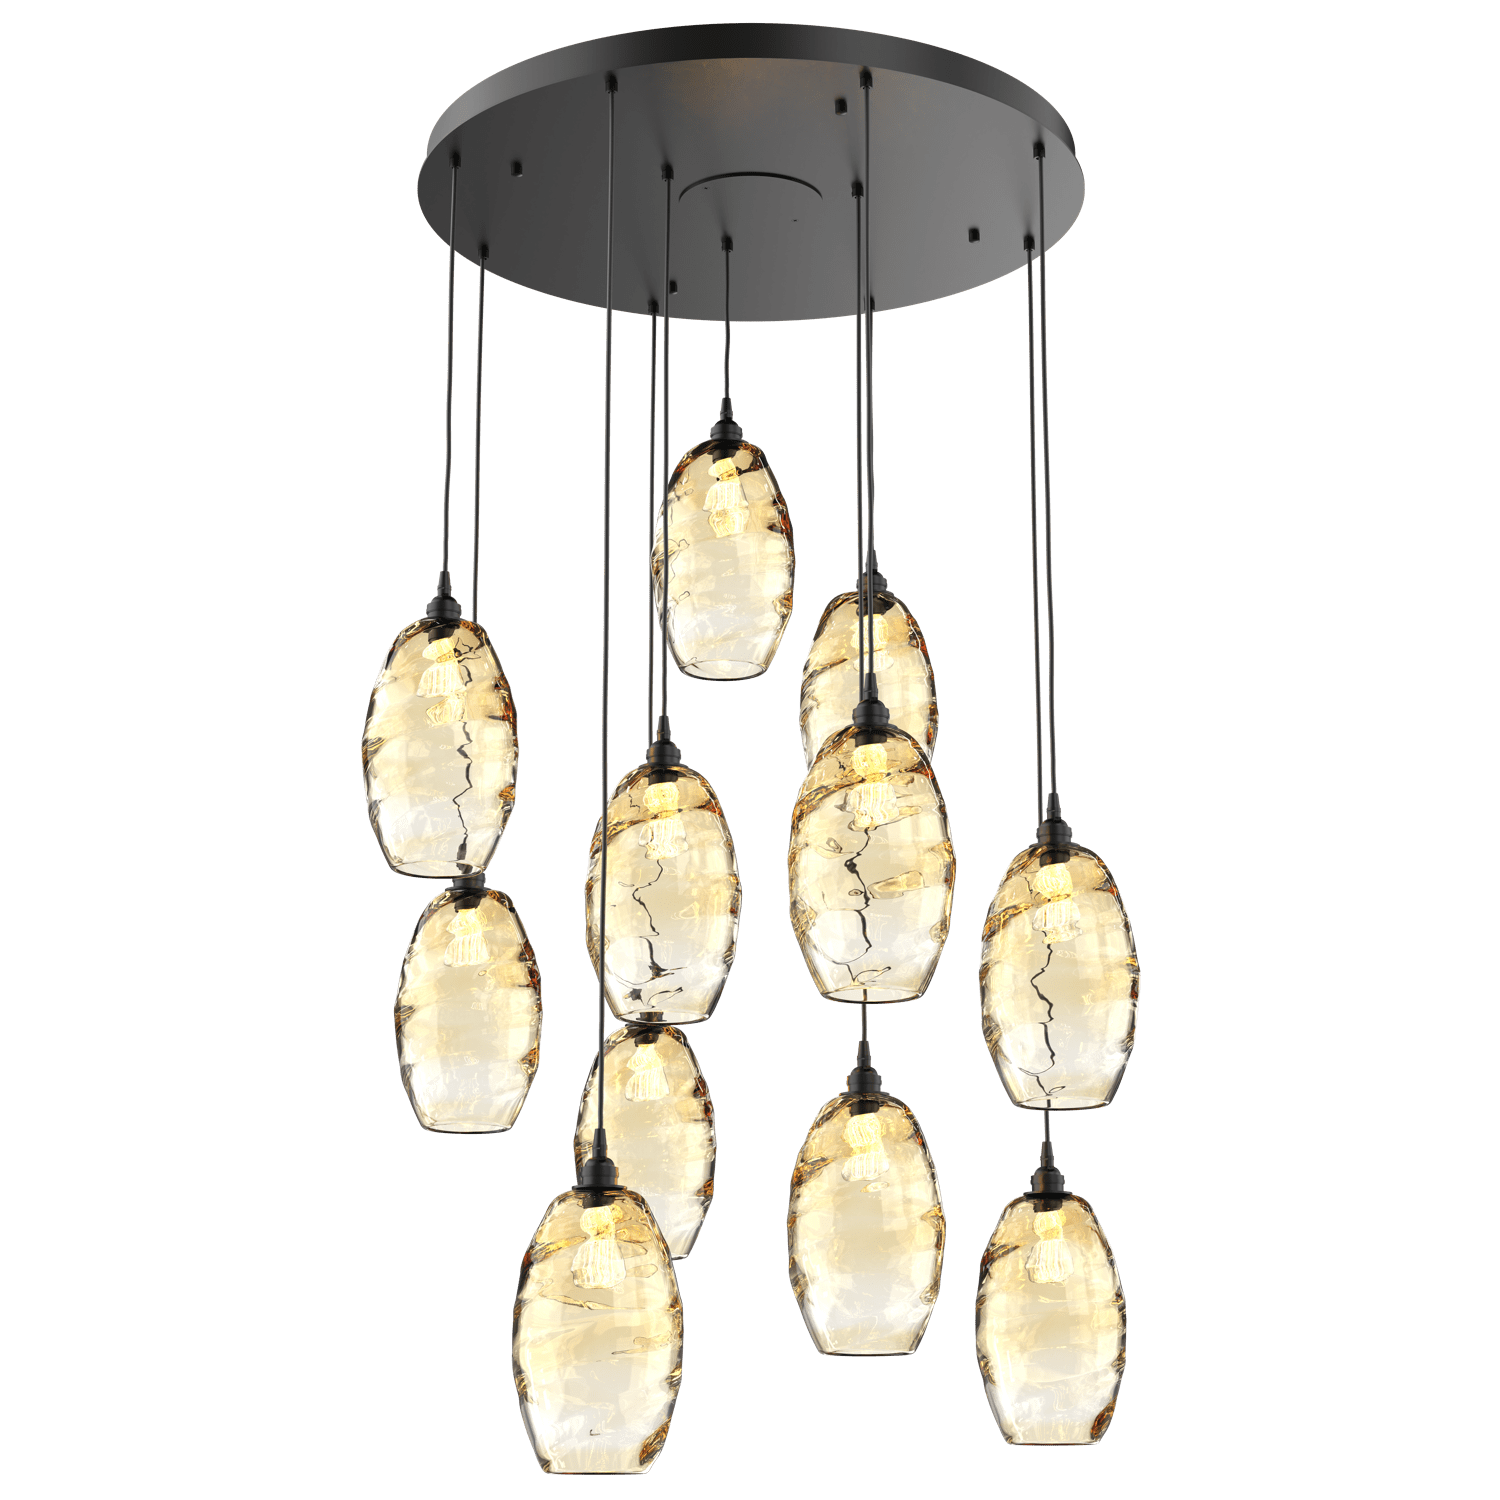 CHB0035-11-MB-OA-Hammerton-Studio-Optic-Blown-Glass-Elisse-11-light-round-pendant-chandelier-with-matte-black-finish-and-optic-amber-blown-glass-shades-and-incandescent-lamping